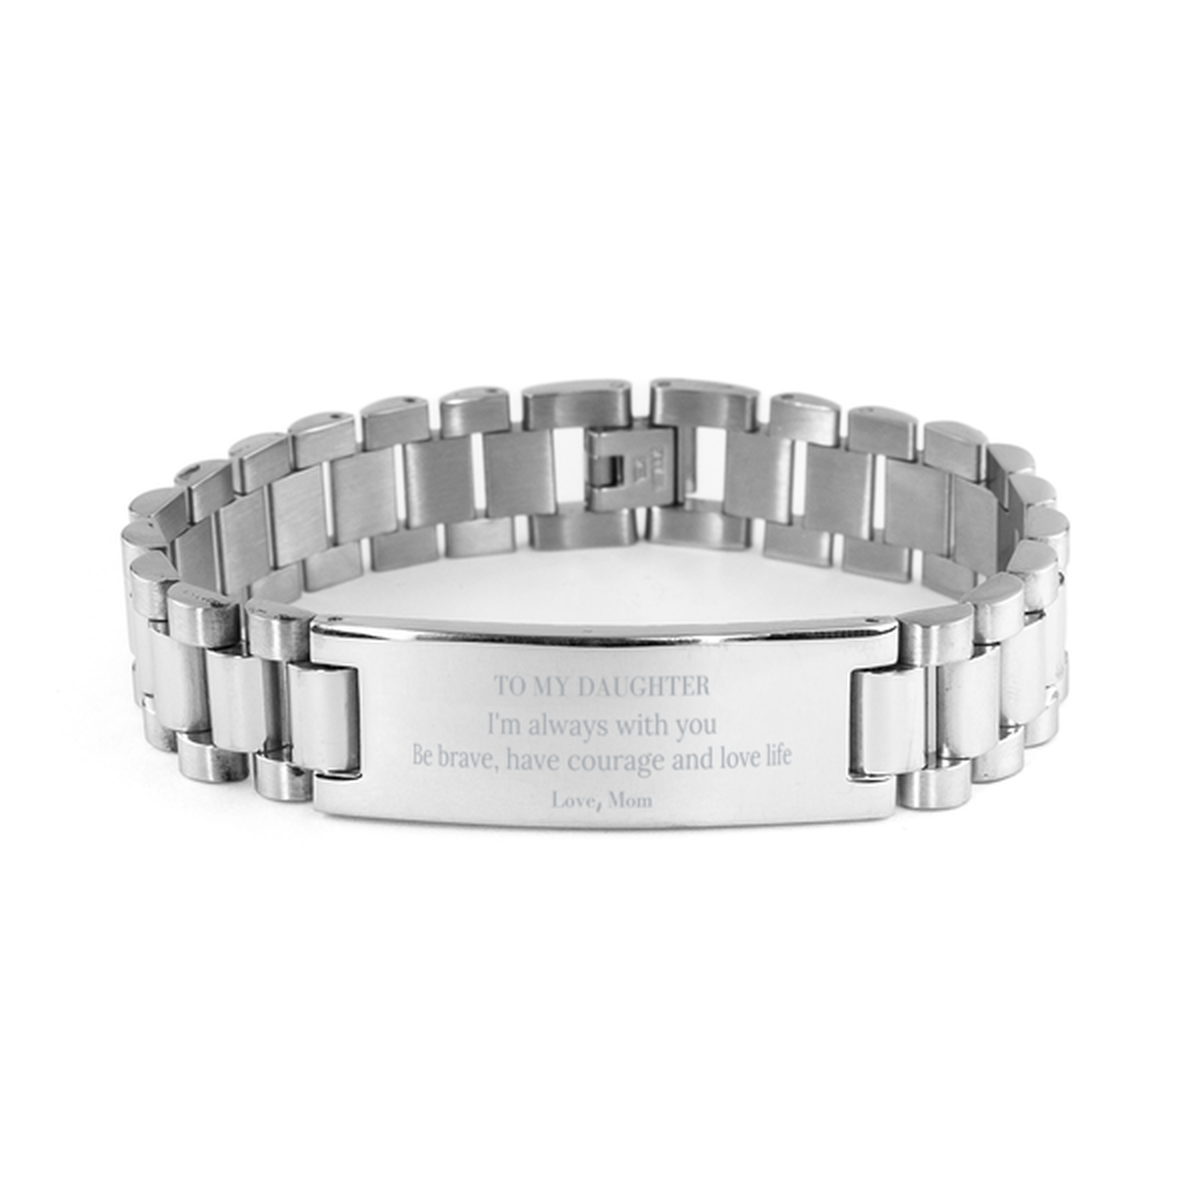 To My Daughter Gifts from Mom, Unique Ladder Stainless Steel Bracelet Inspirational Christmas Birthday Graduation Gifts for Daughter I'm always with you. Be brave, have courage and love life. Love, Mom